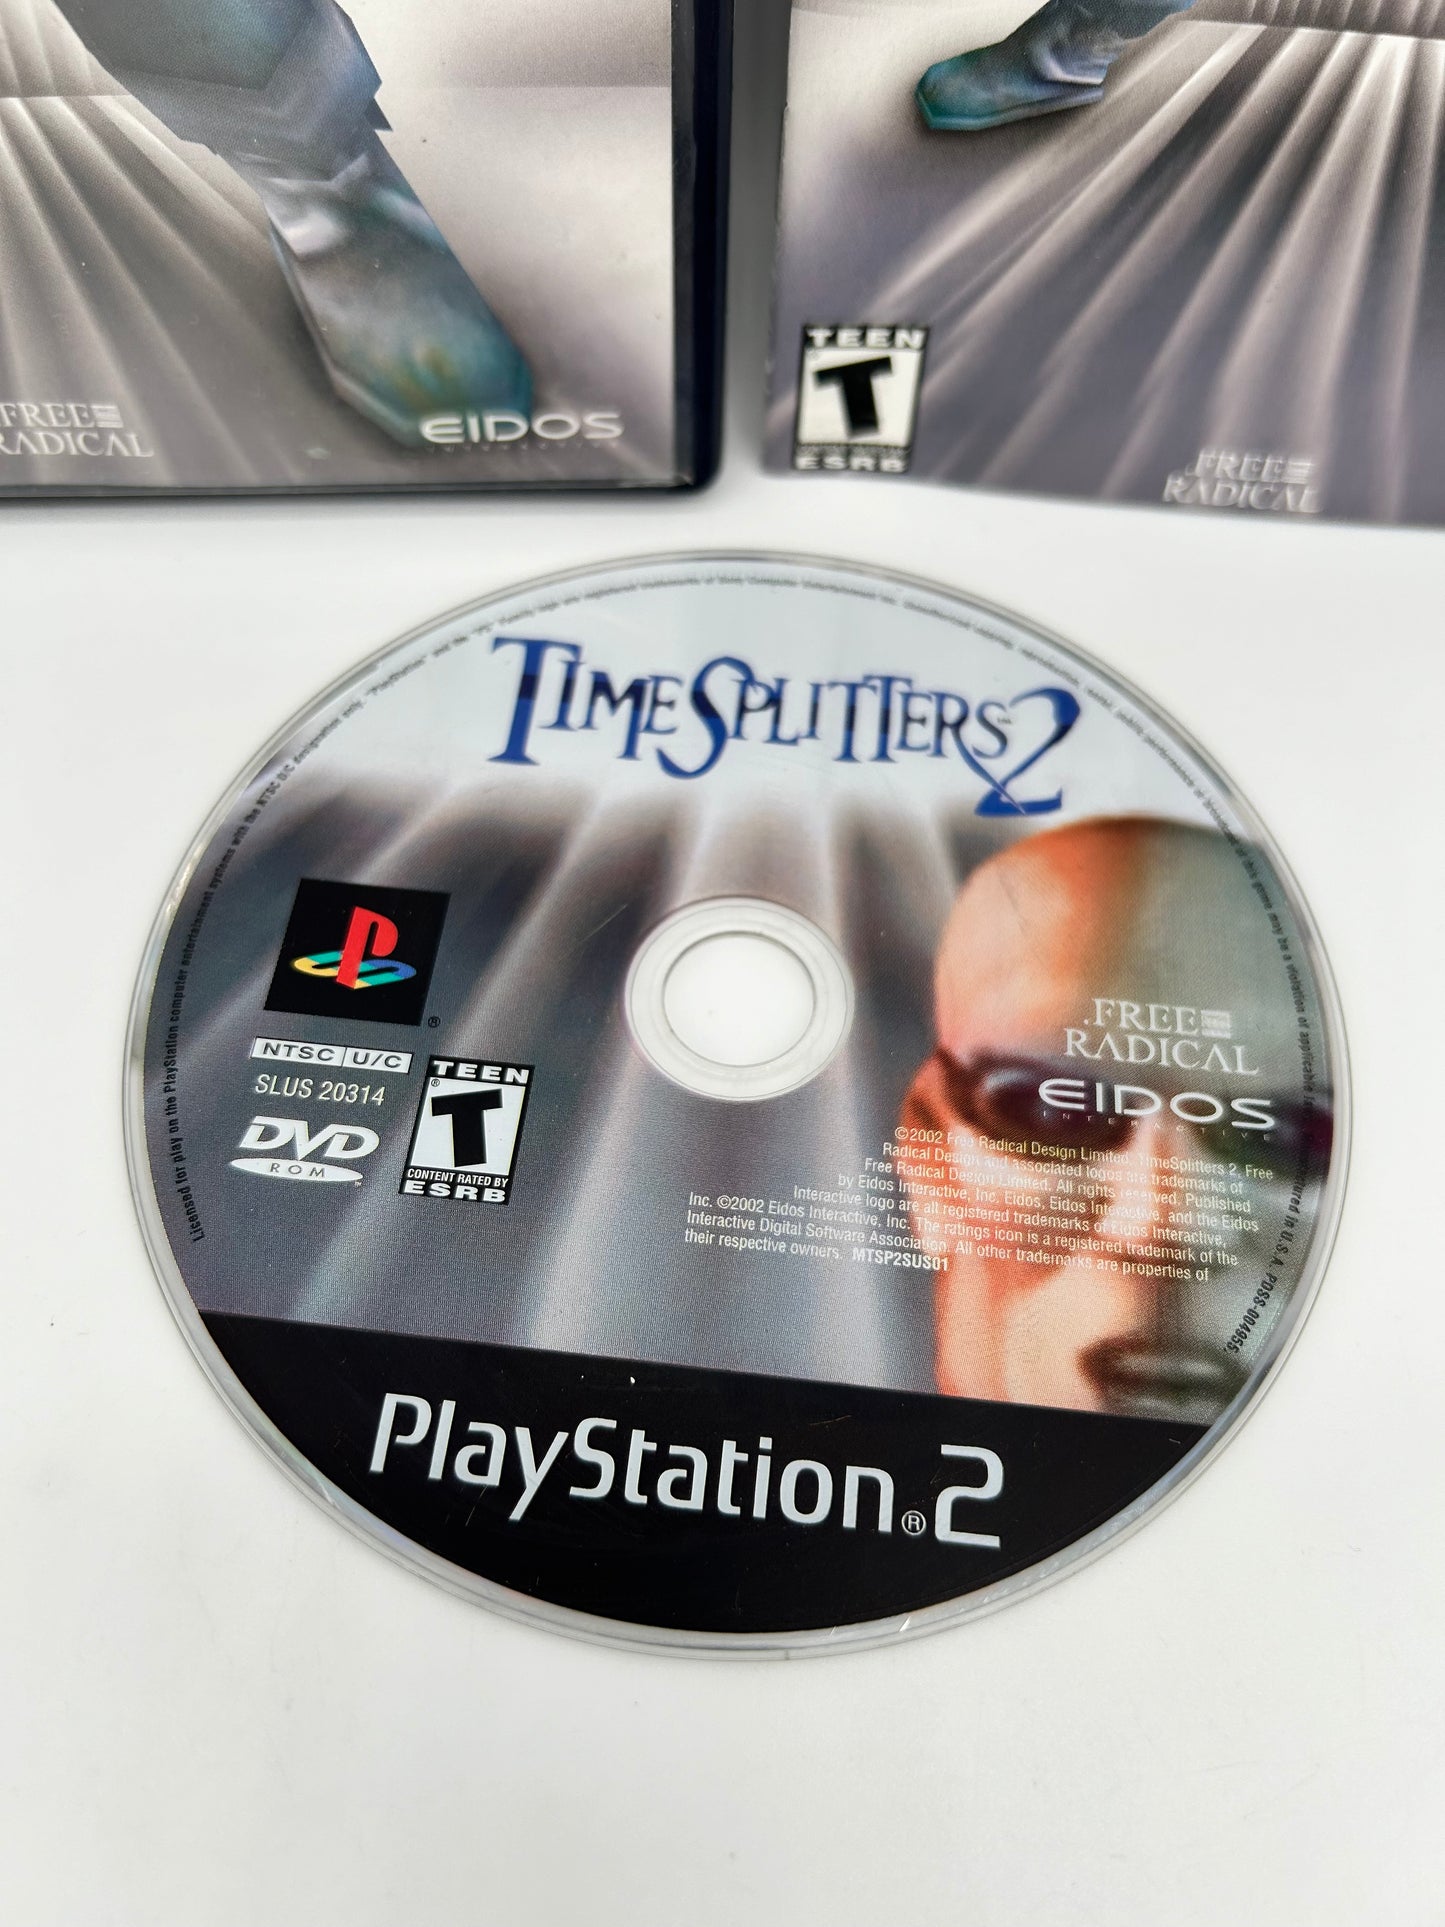 SONY PLAYSTATiON 2 [PS2] | TiME SPLiTTERS 2